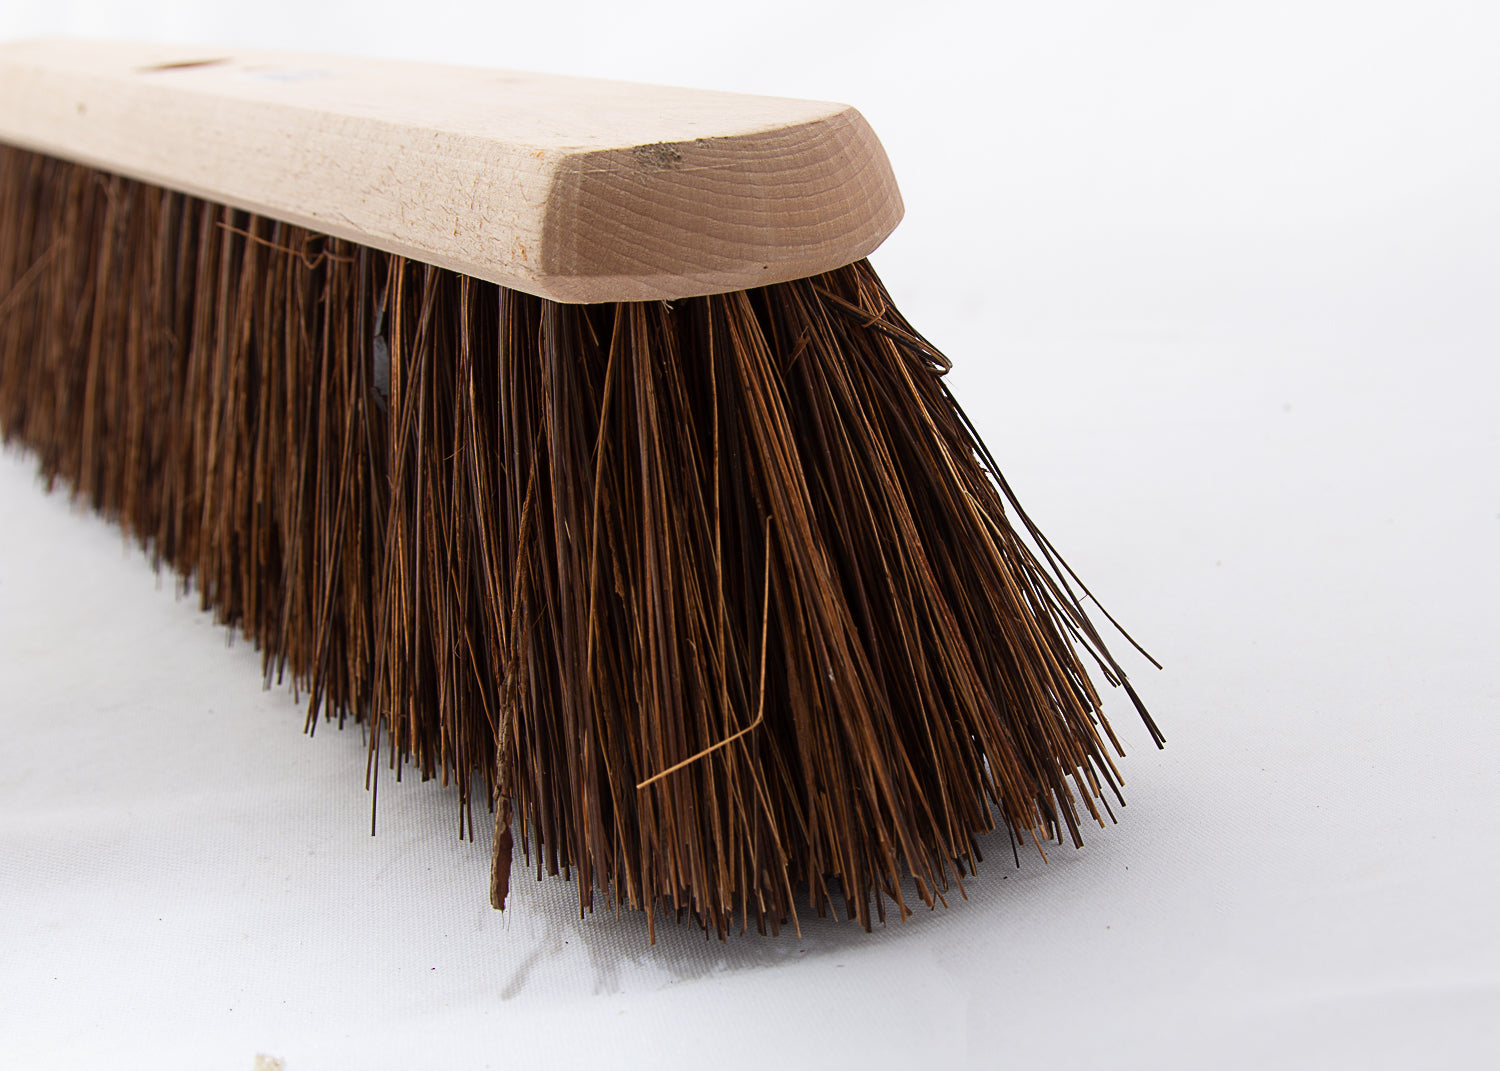 wide yard broom with metal stay and natural bristles